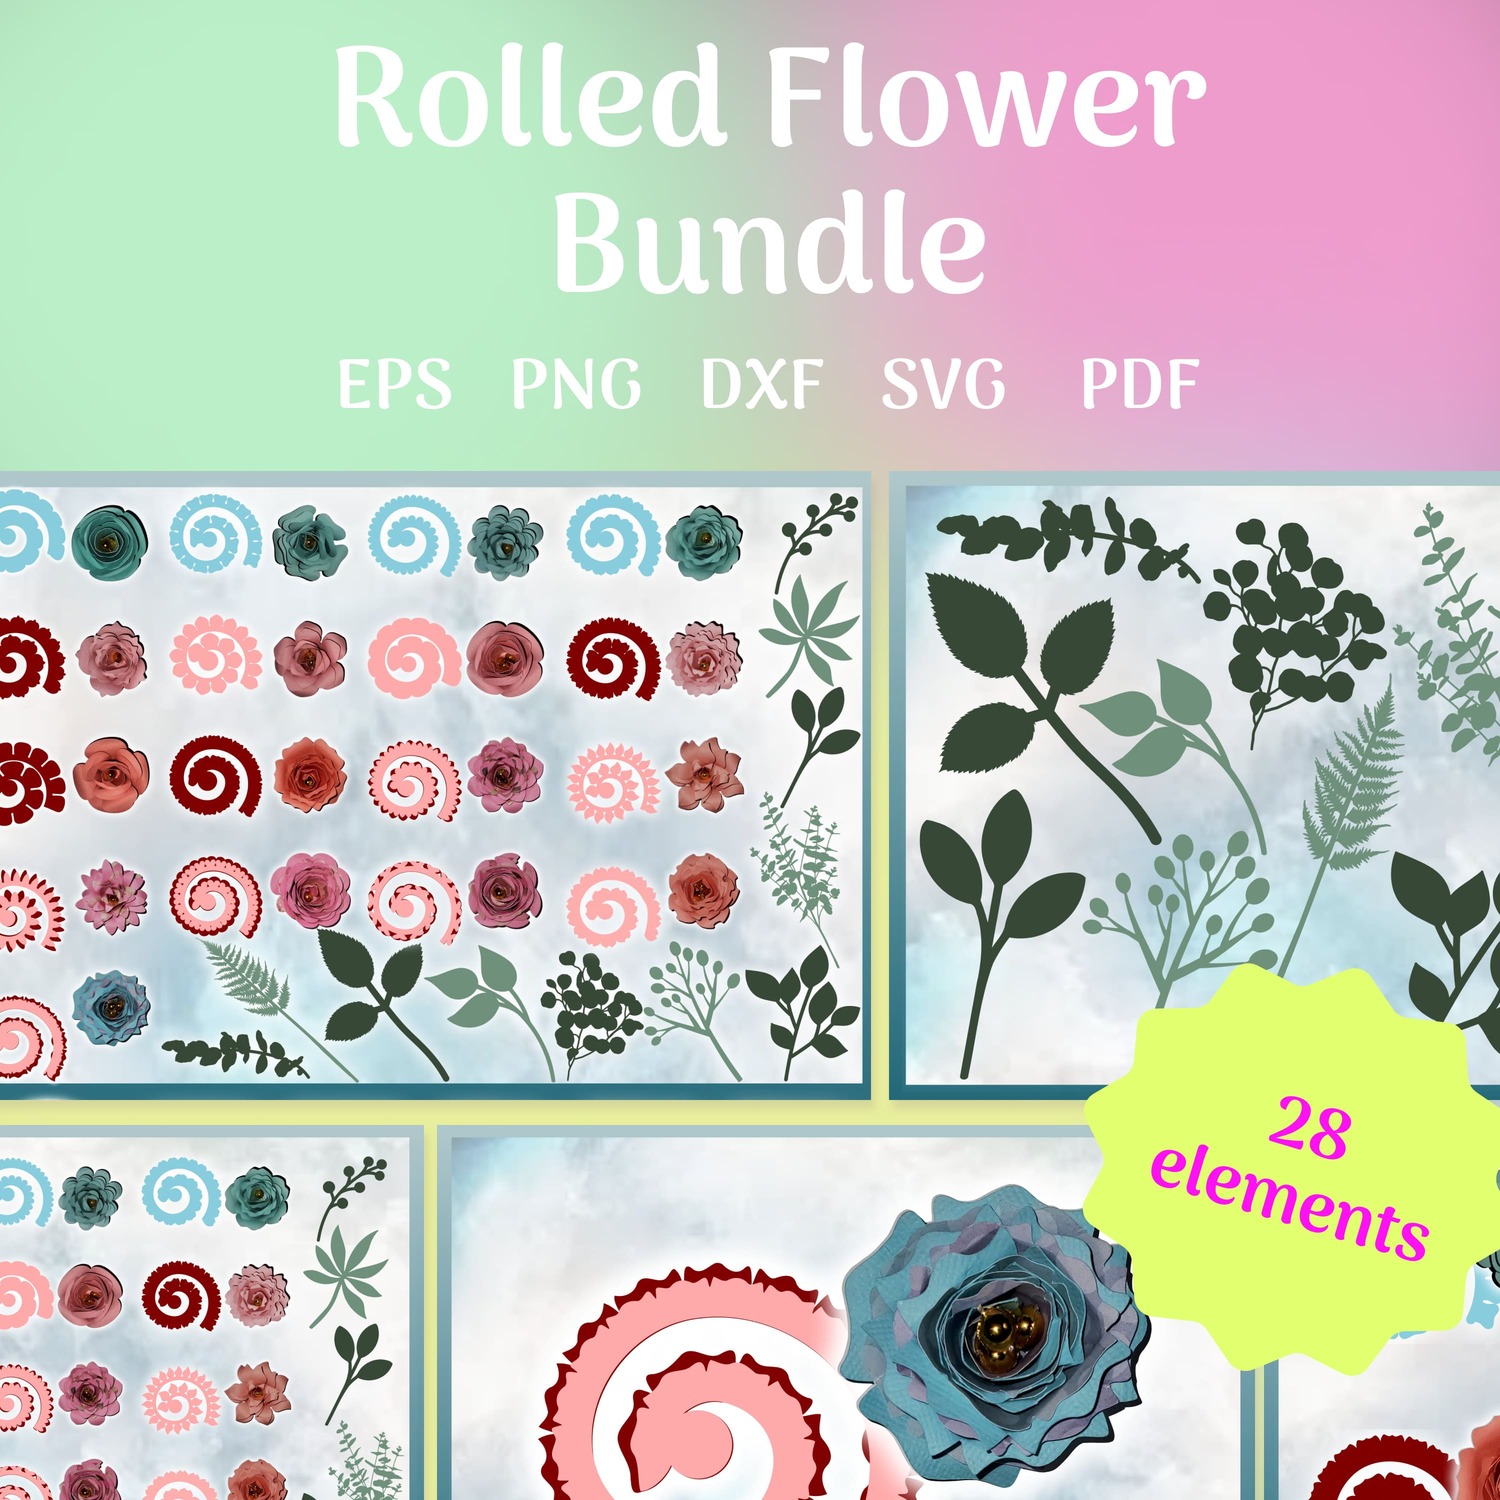 Rolled Flower SVG Bundle | 17 Rolled Paper Flower Templates main cover.